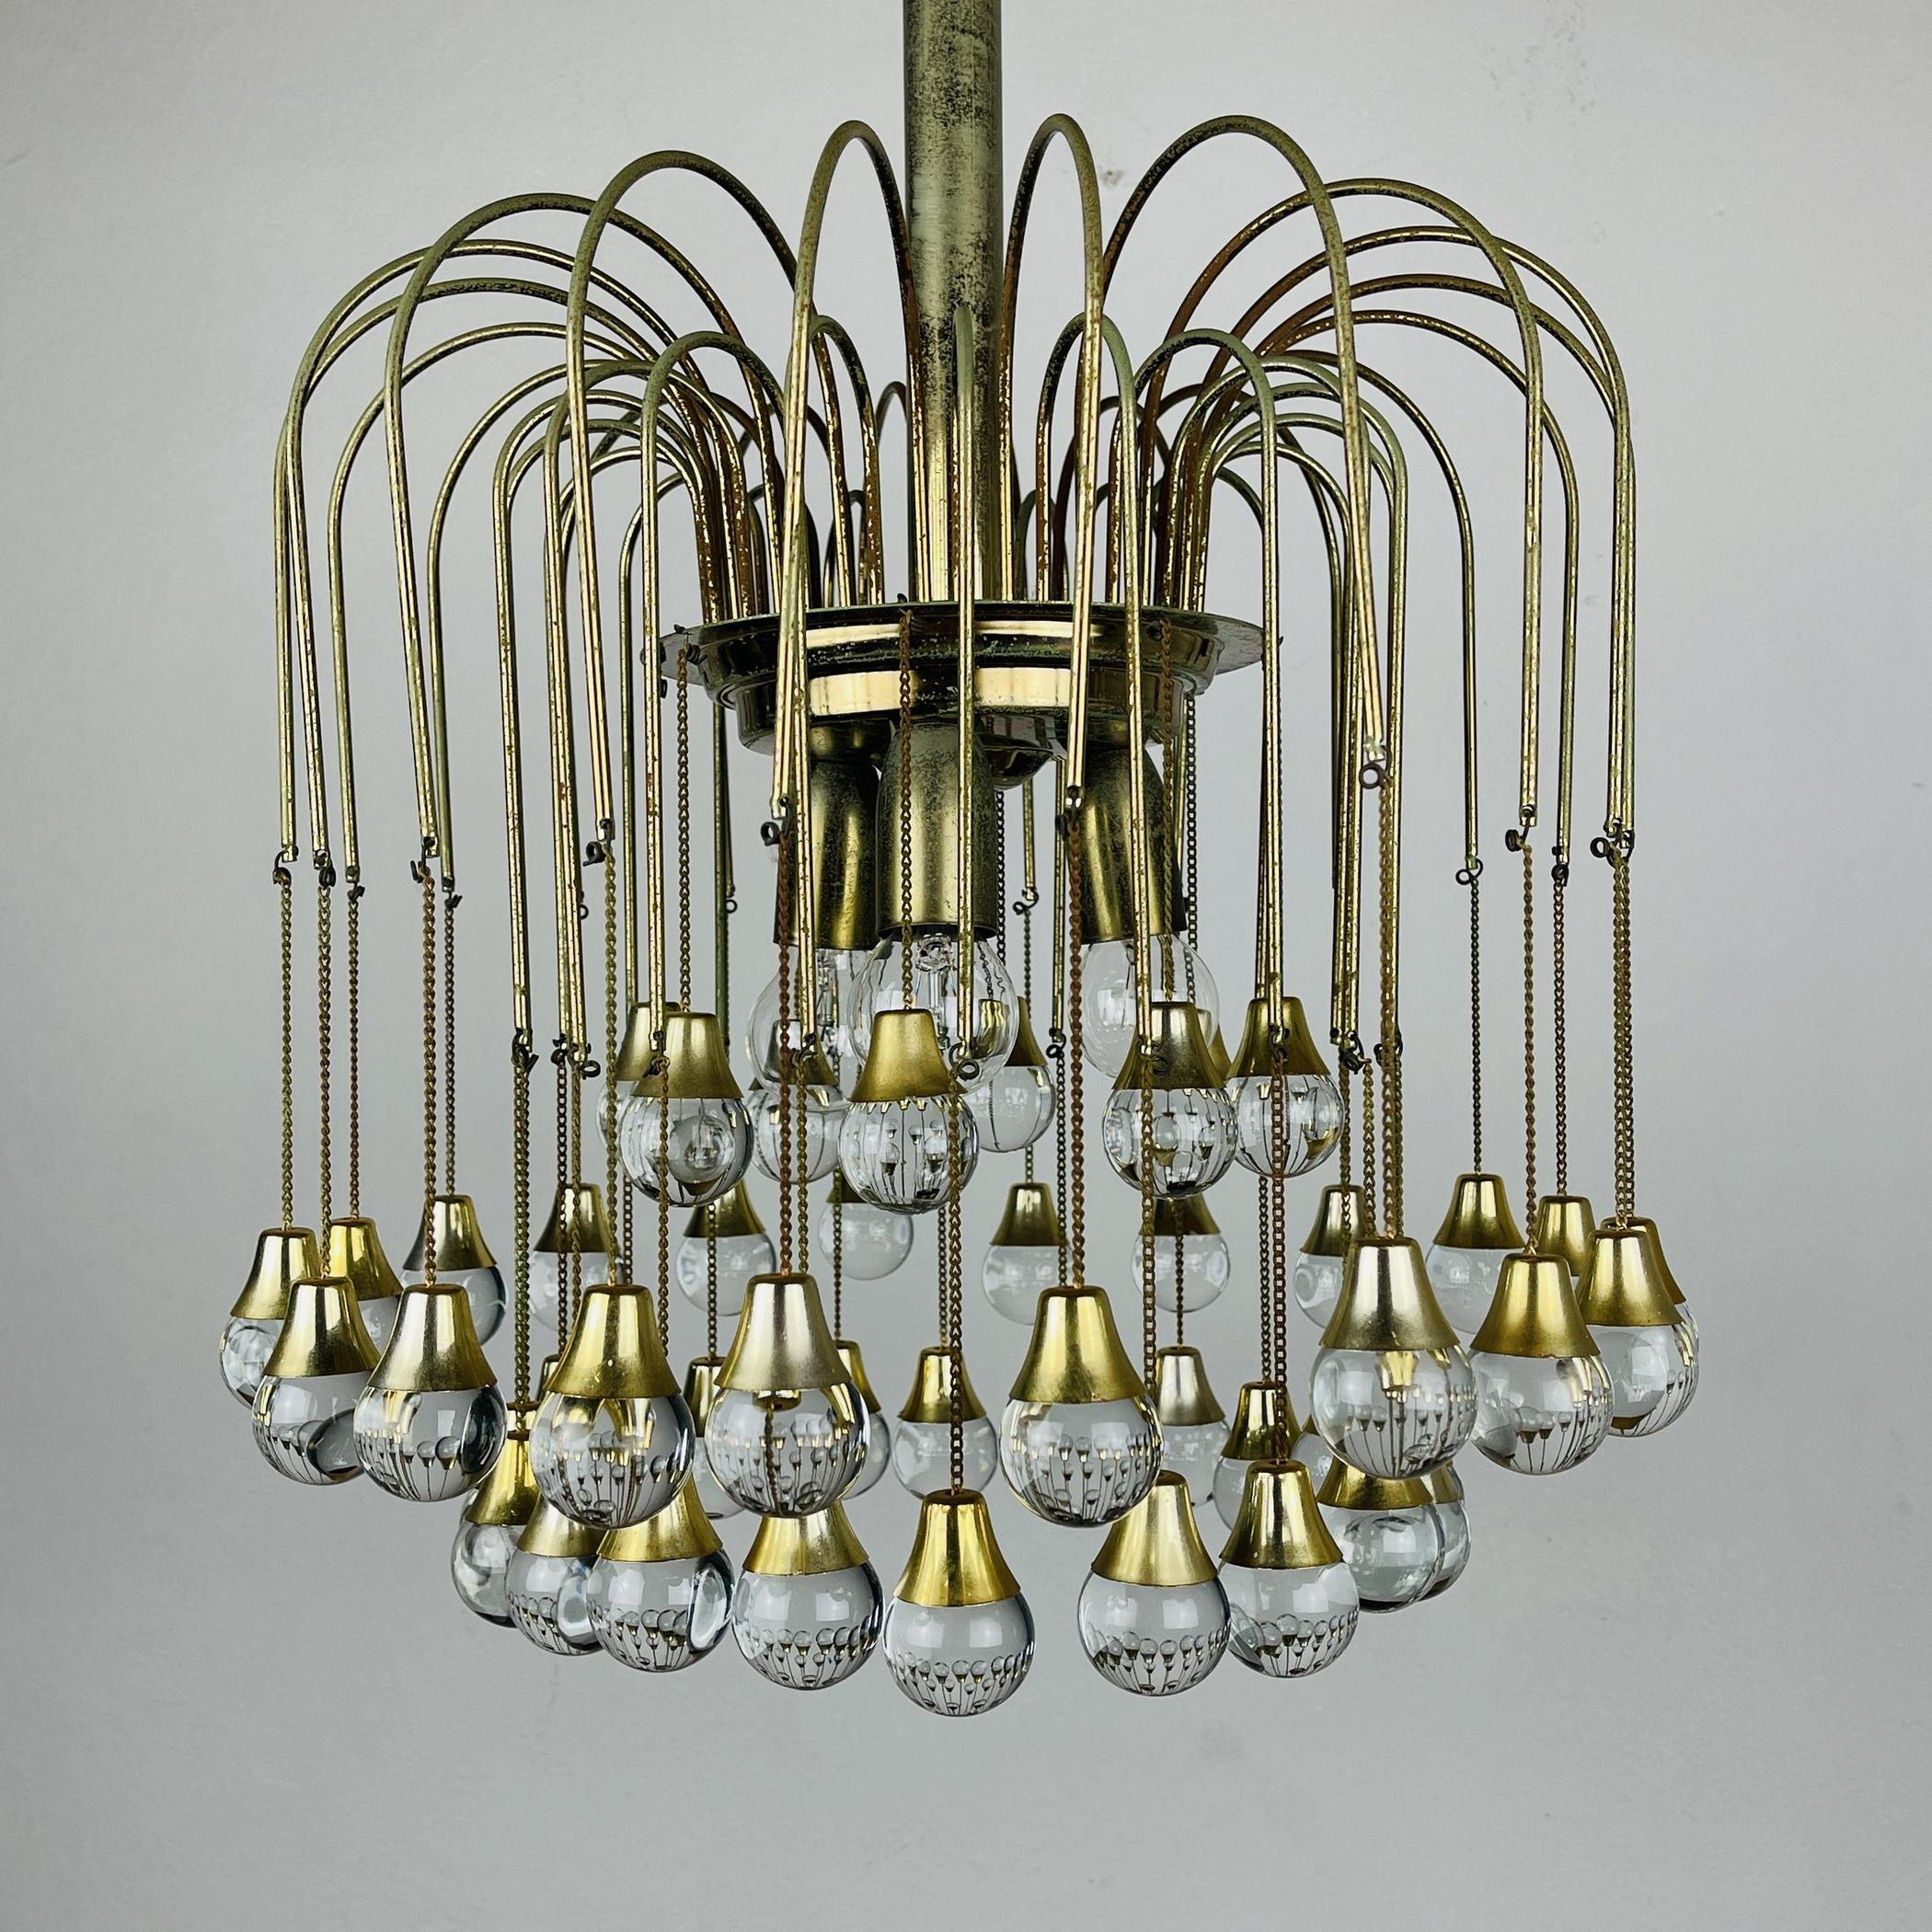 Vintage Cascade Glass Chandelier Italy 1960s Brass and 48 Glass Balls 6